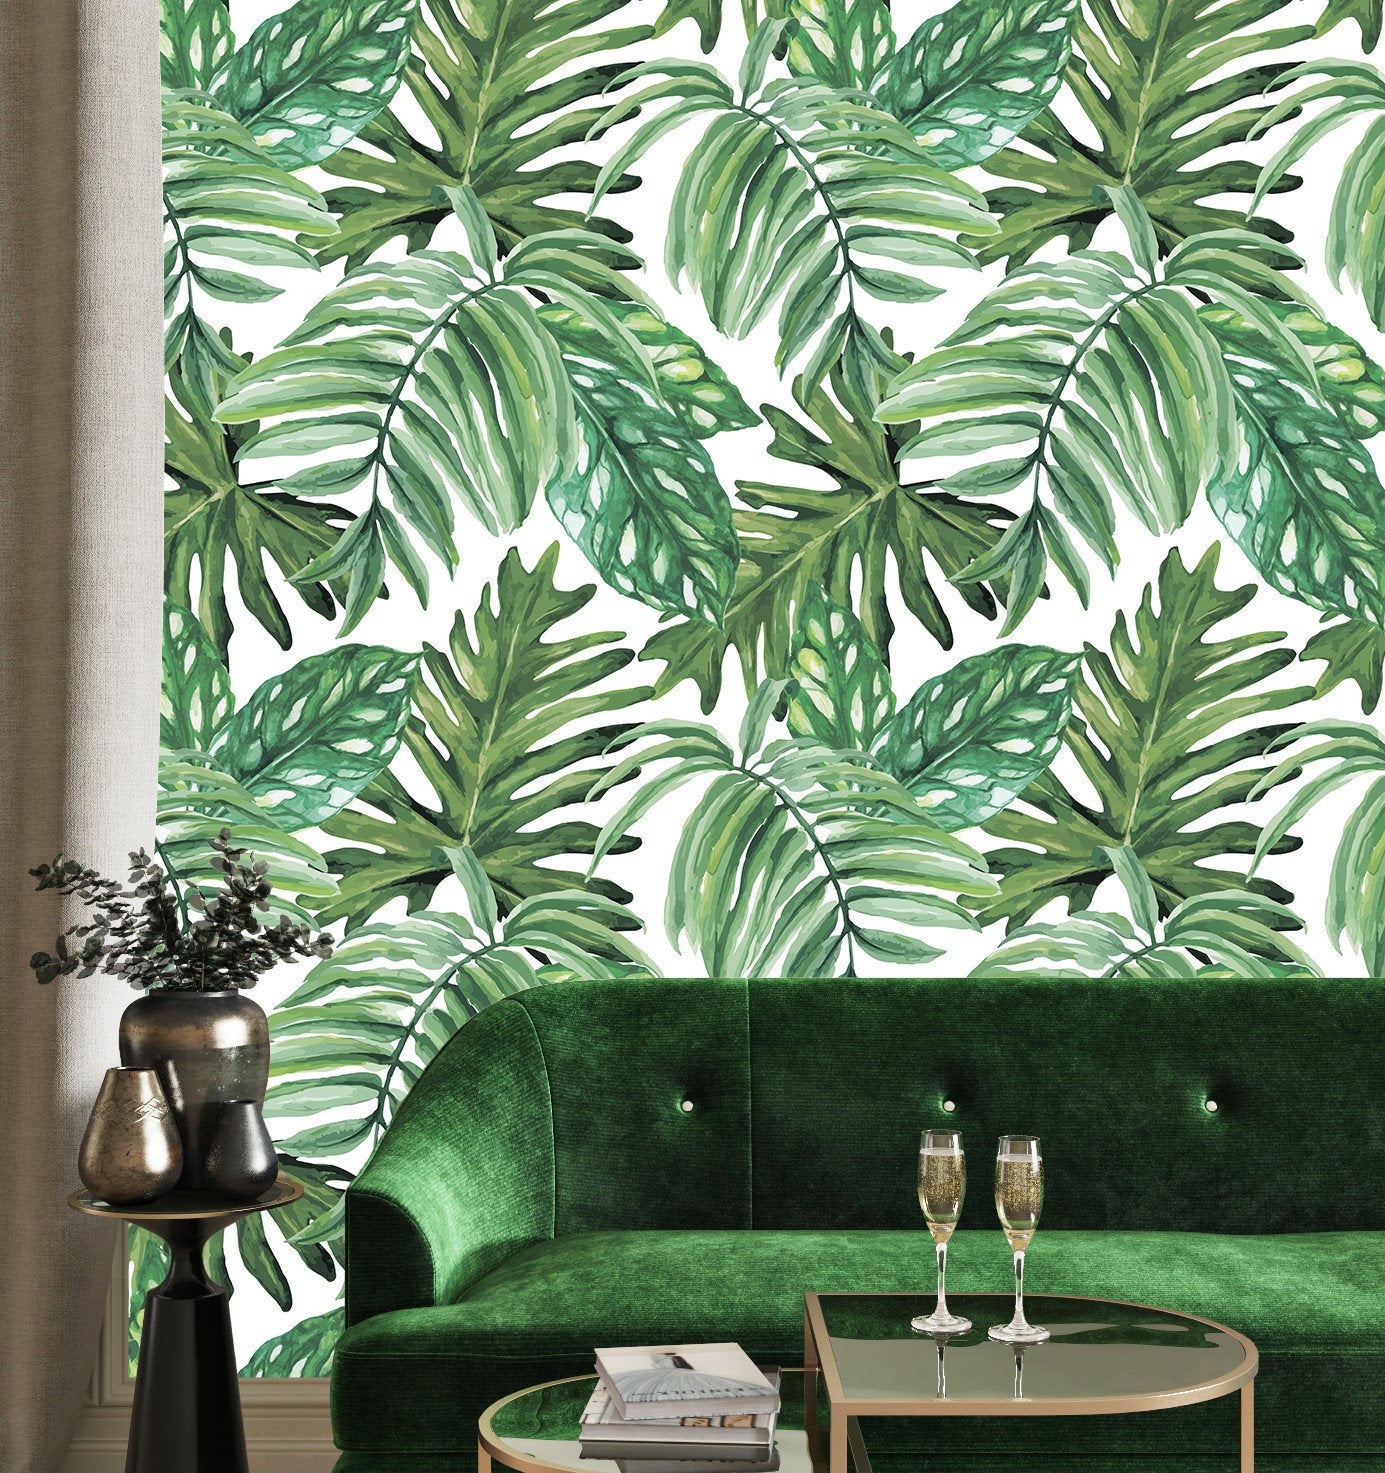 Palm Wallpaper Peel and Stick, Green Leaf Wallpaper Tropical Wallpaper, Removable Wall Paper